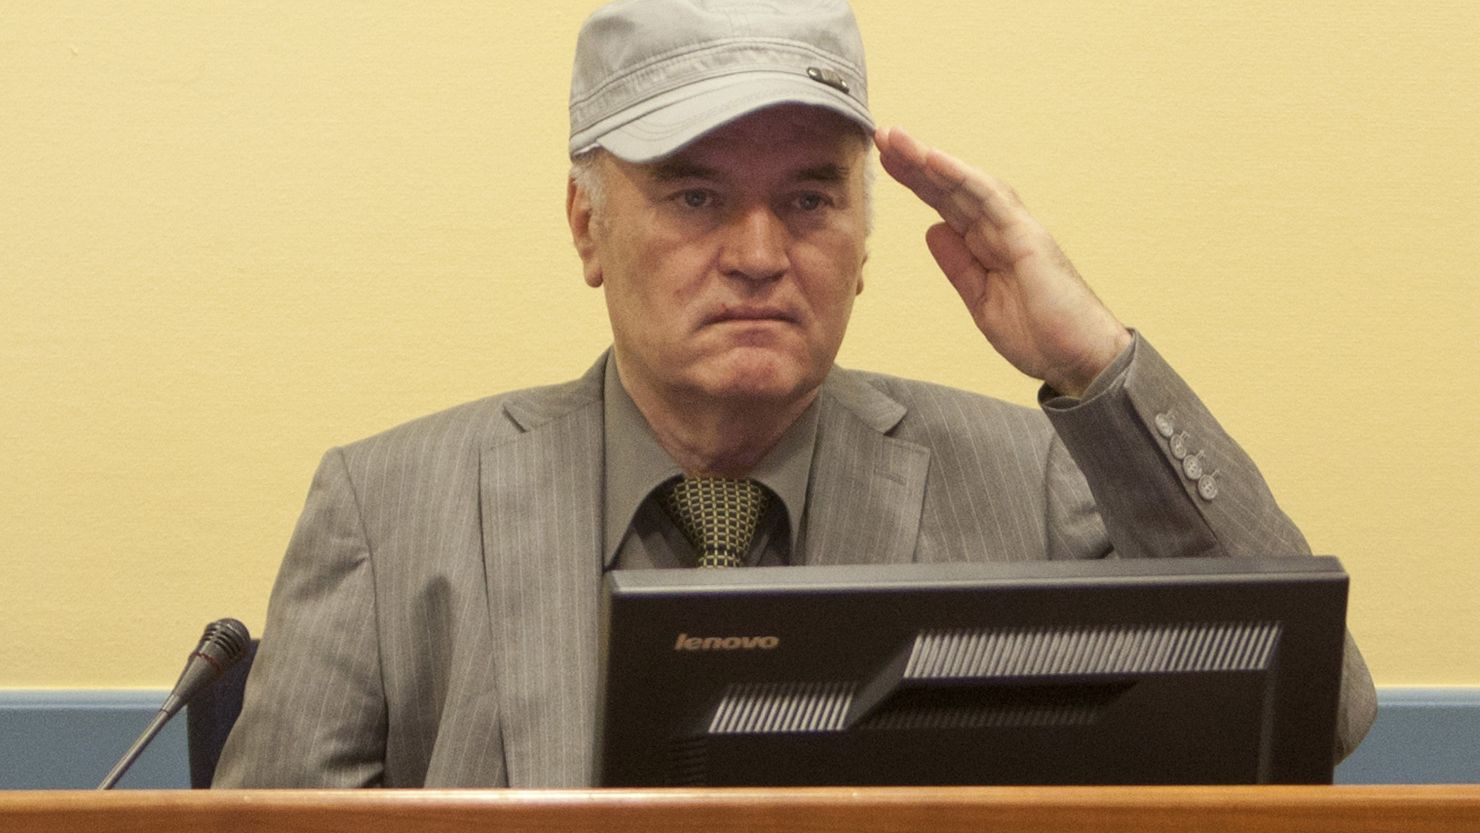 Ratko Mladic makes his first appearance at the International Criminal Tribunal on June 3, 2011 in The Hague.